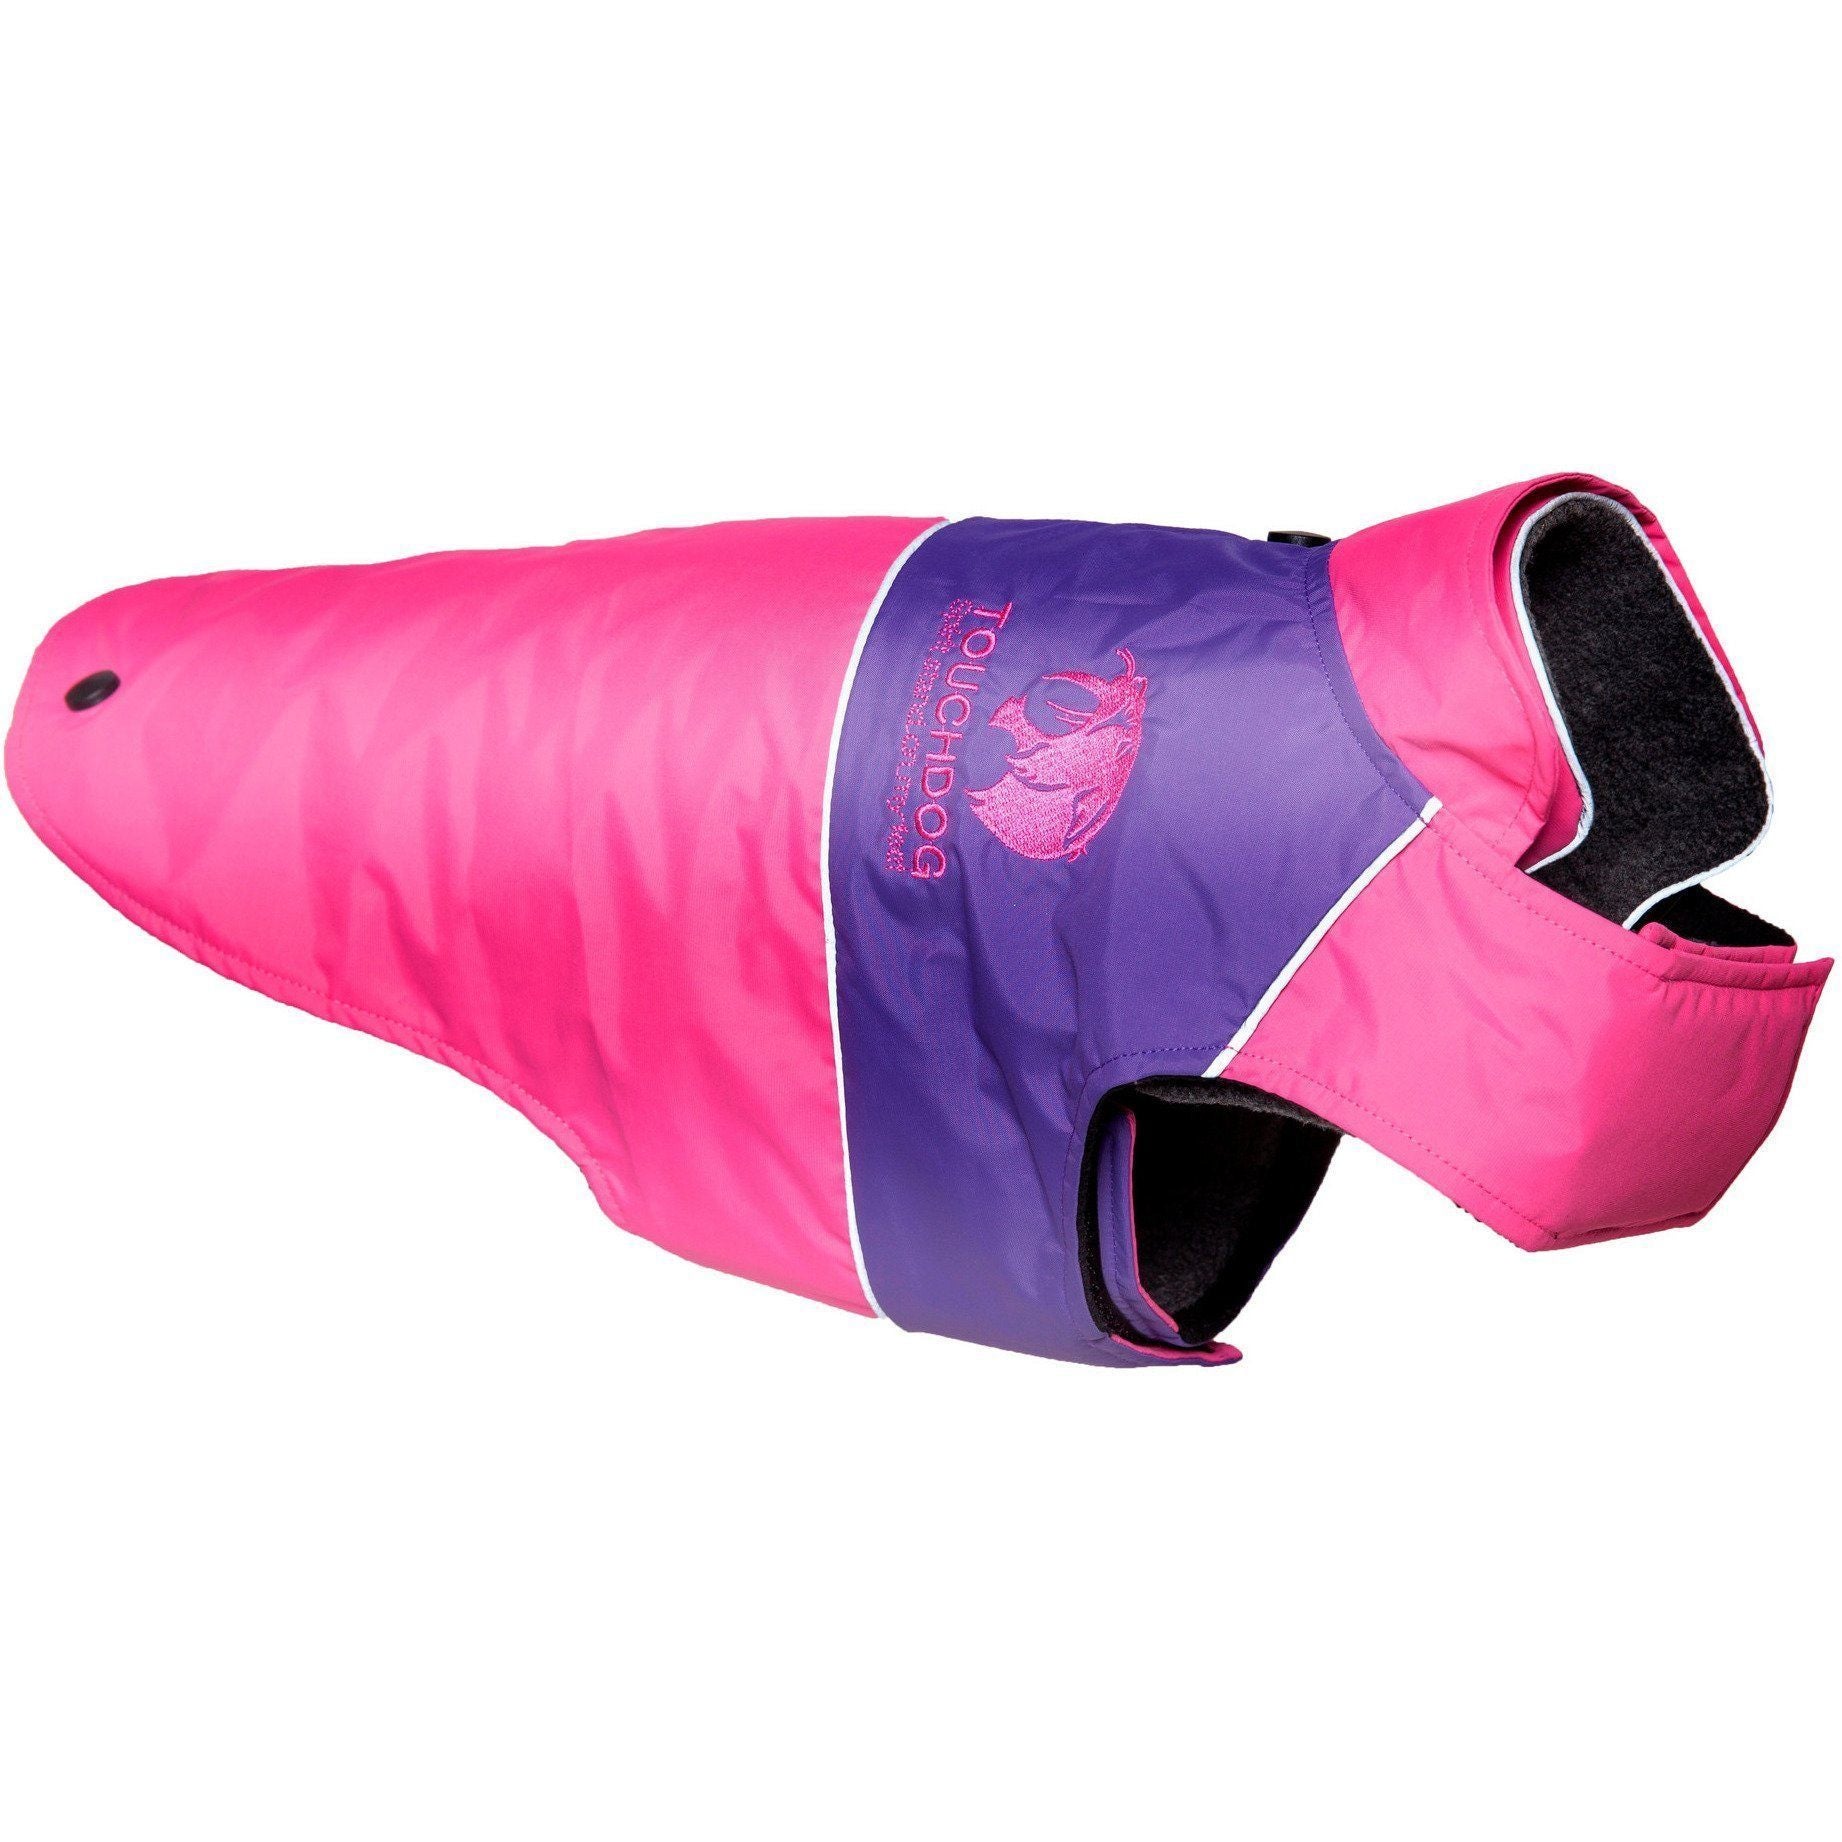 Touchdog ® Lightening-Shield 2-in-1 Dual-Removable-Layered Waterproof Dog Jacket X-Small Pink, Purple